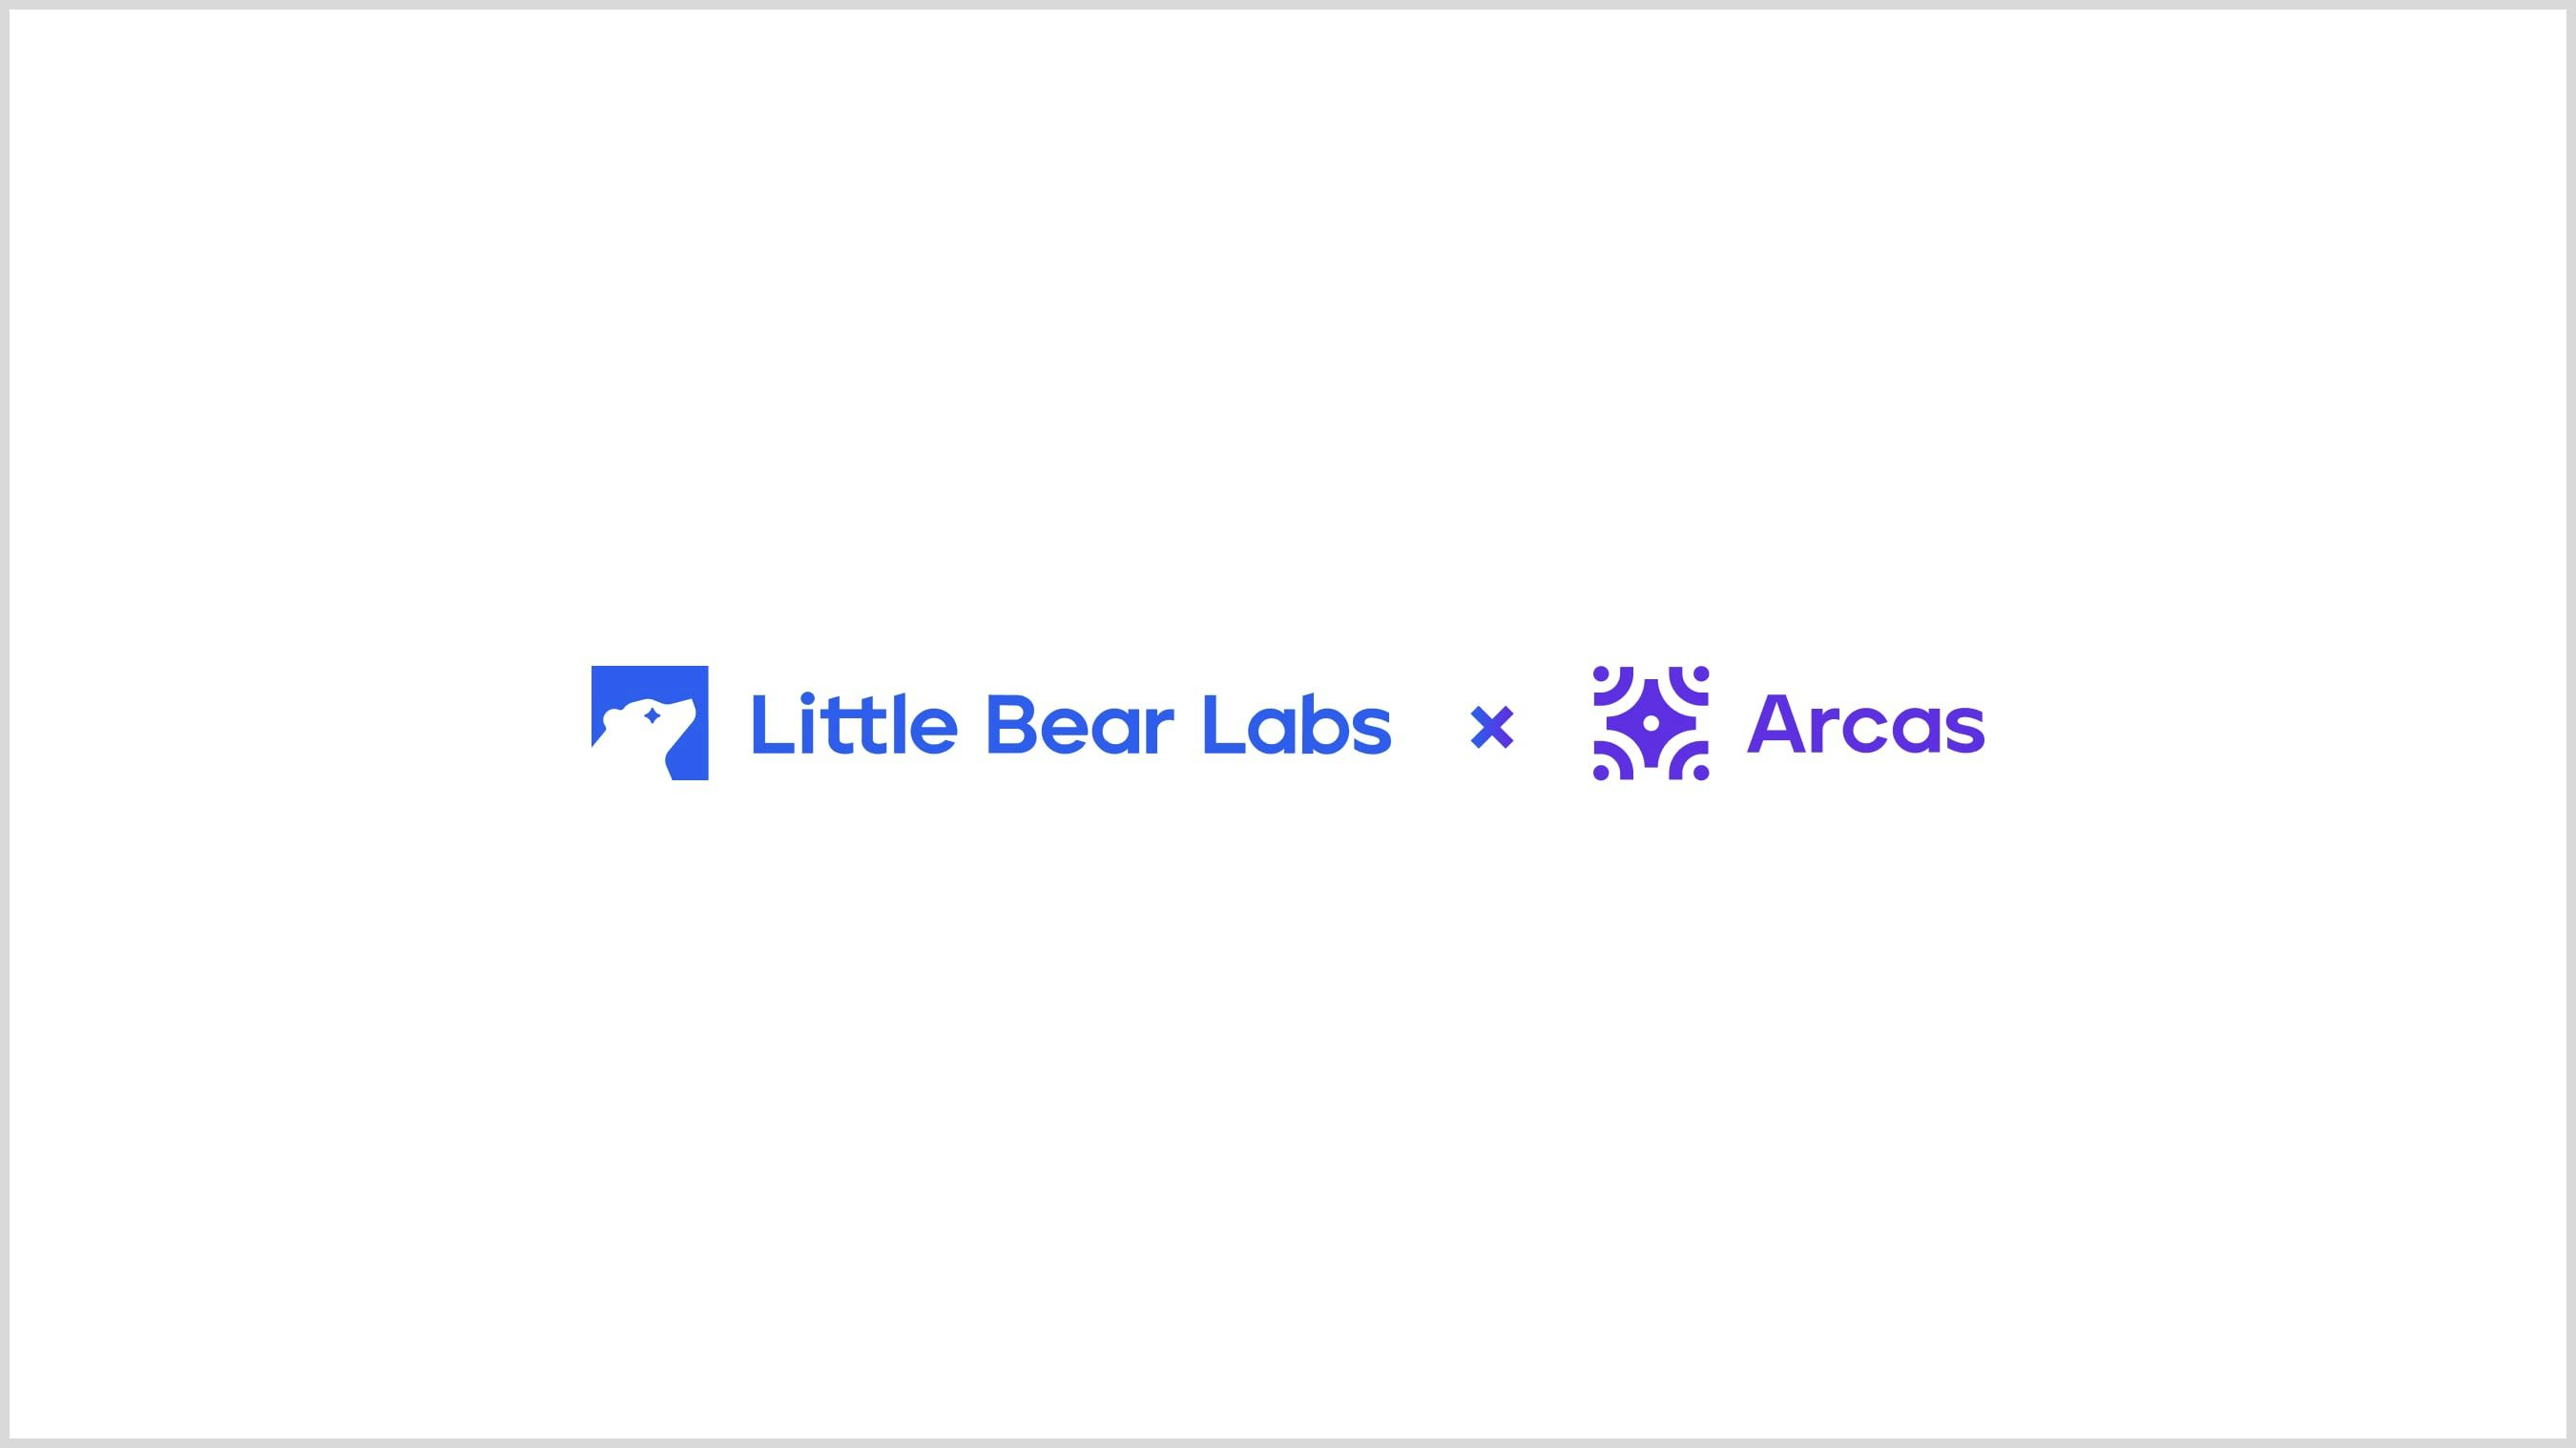 Grouping of Little Bear Labs and Arcas logos